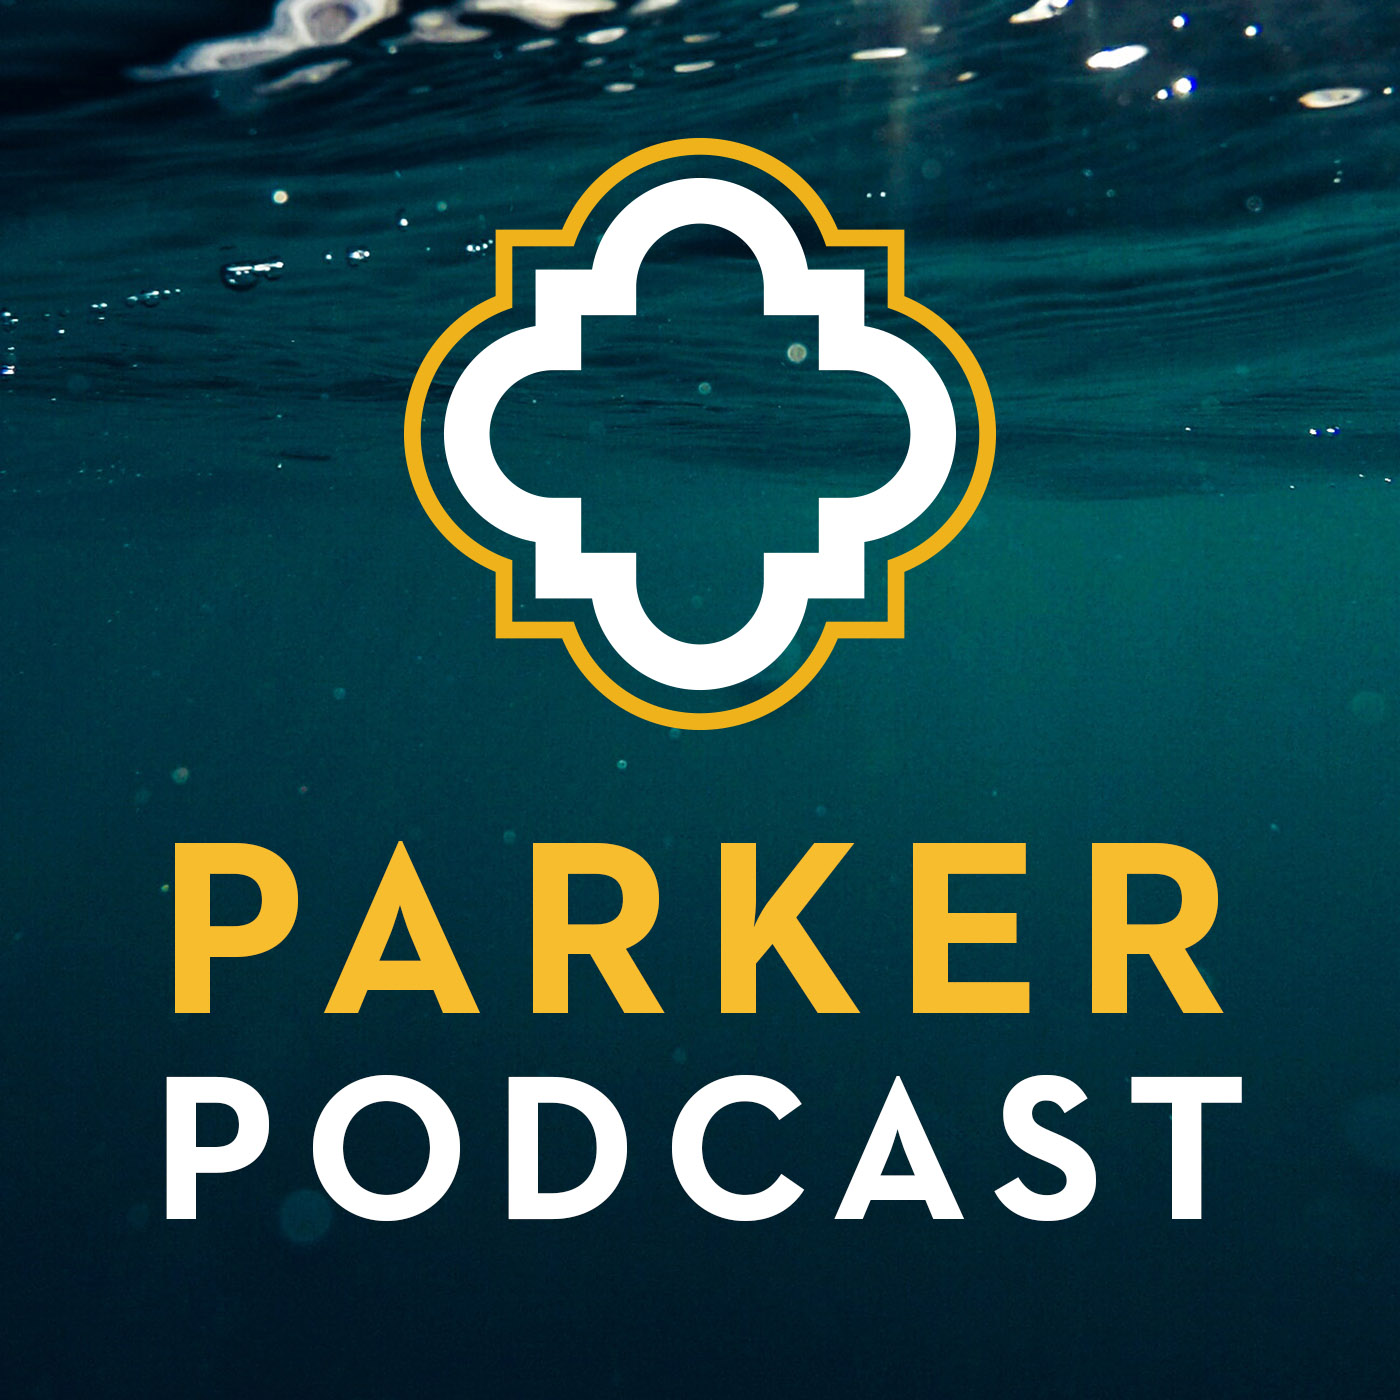 Parker Podcast | 2019 Admissions Events